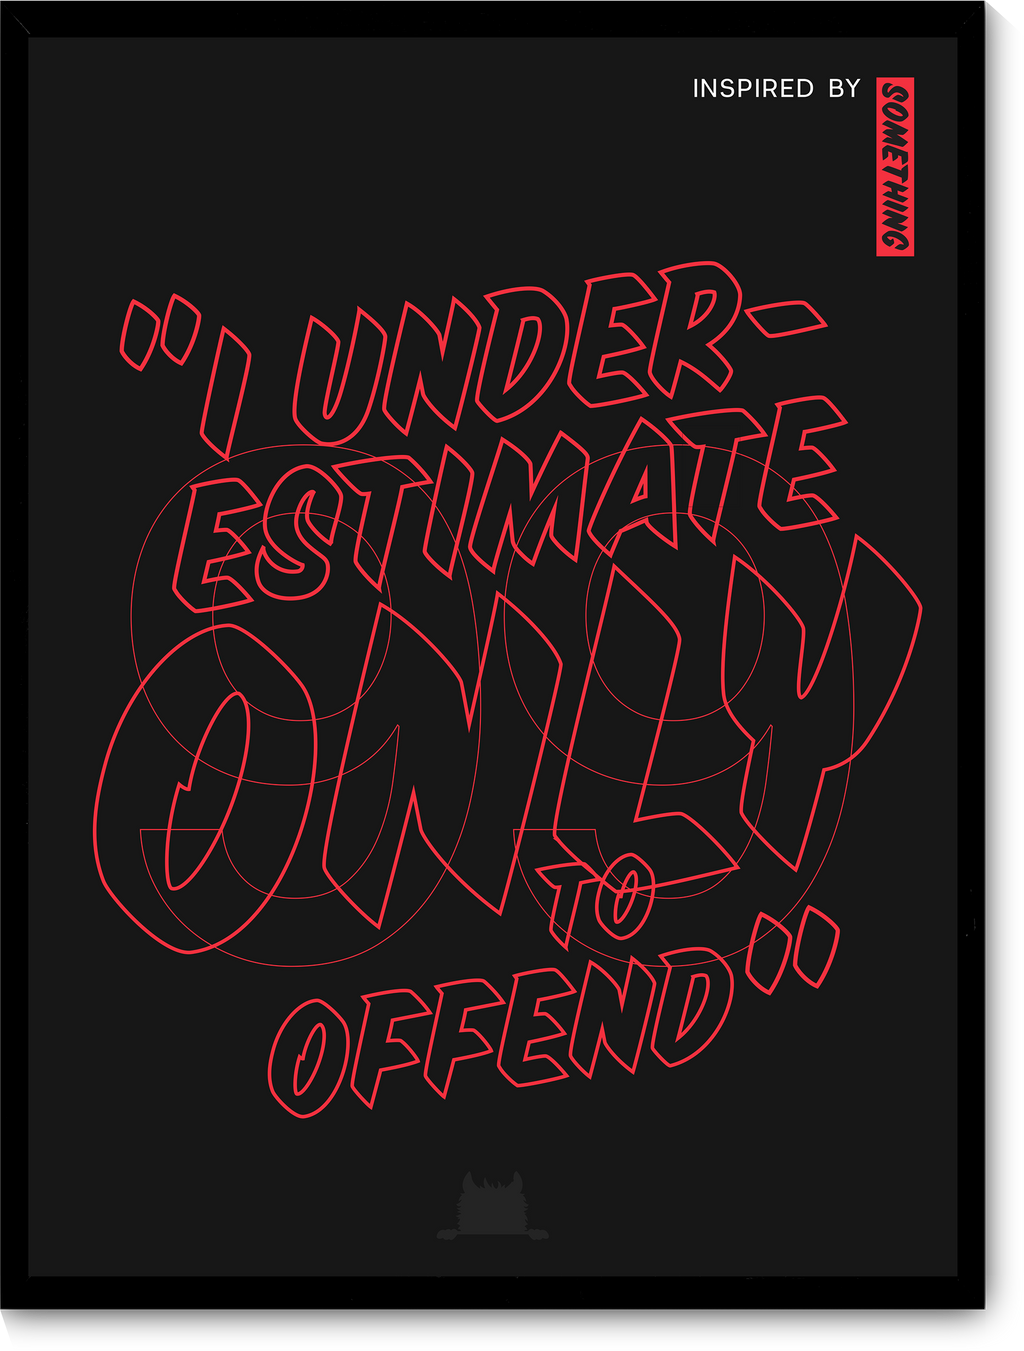 #99 Inspired by a sticker on a laptop: “I underestimate only to offend.”